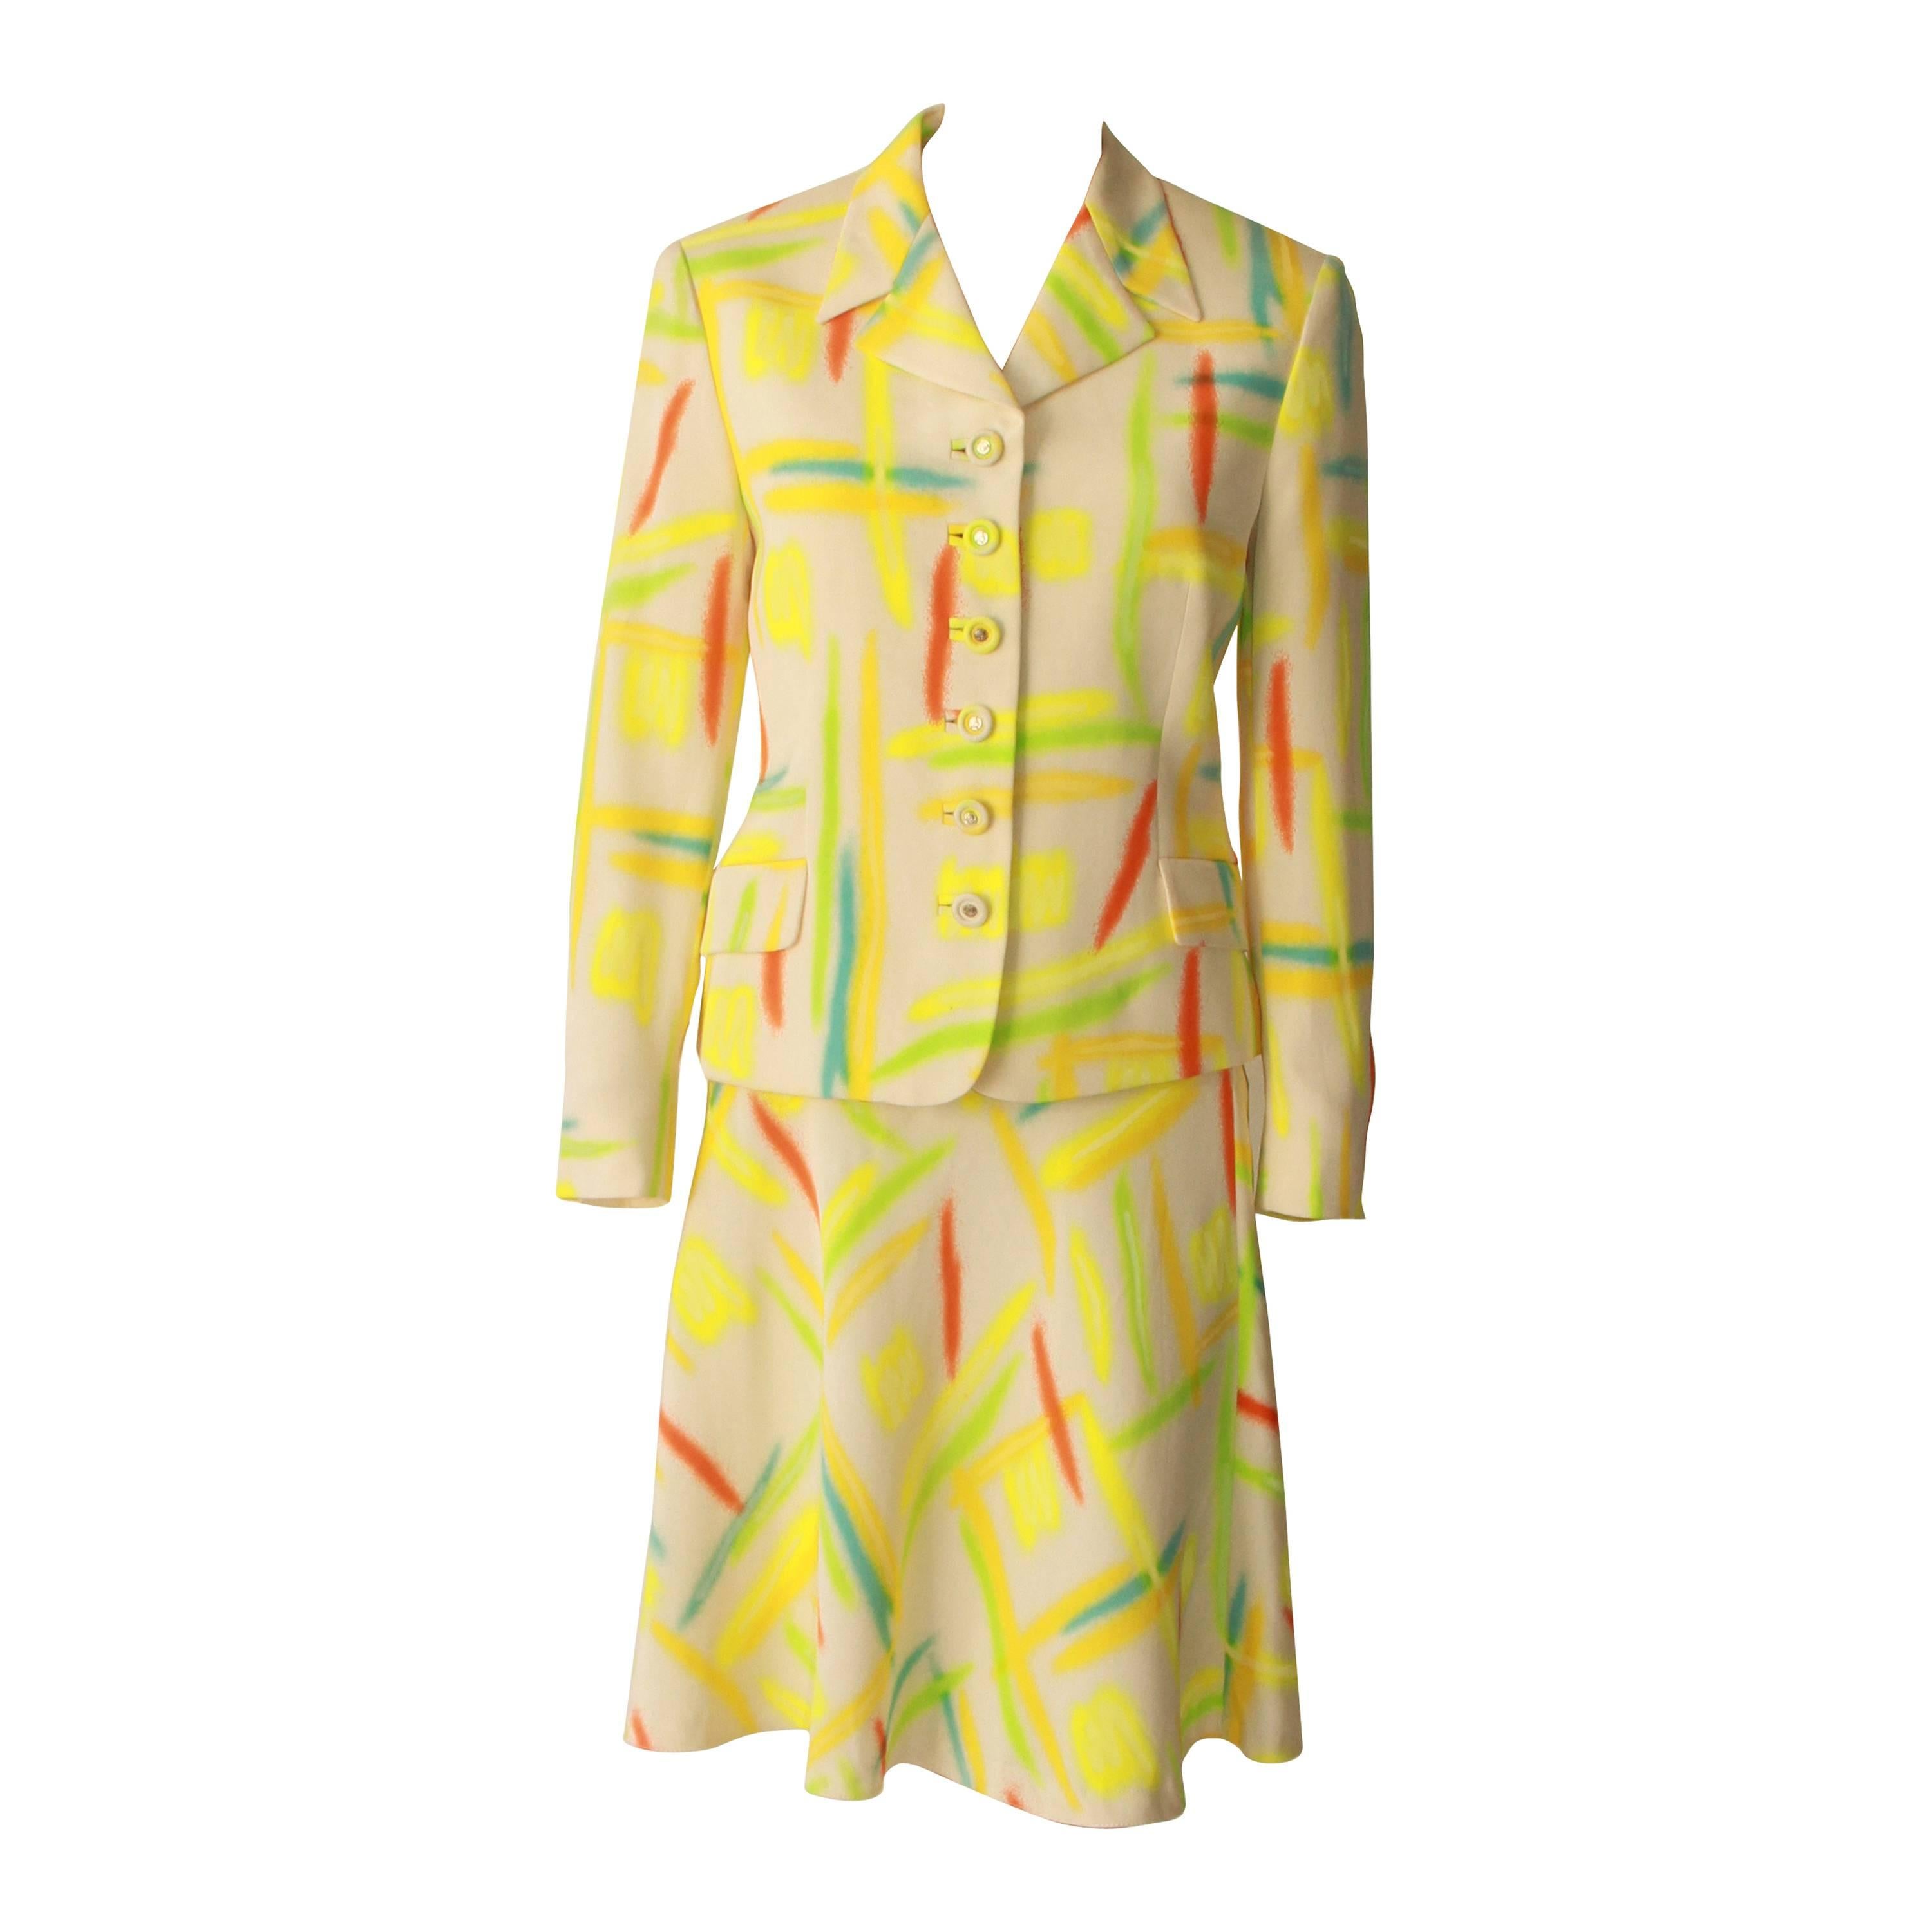 Gianni Versace Silk Printed Suit Spring 1996 For Sale